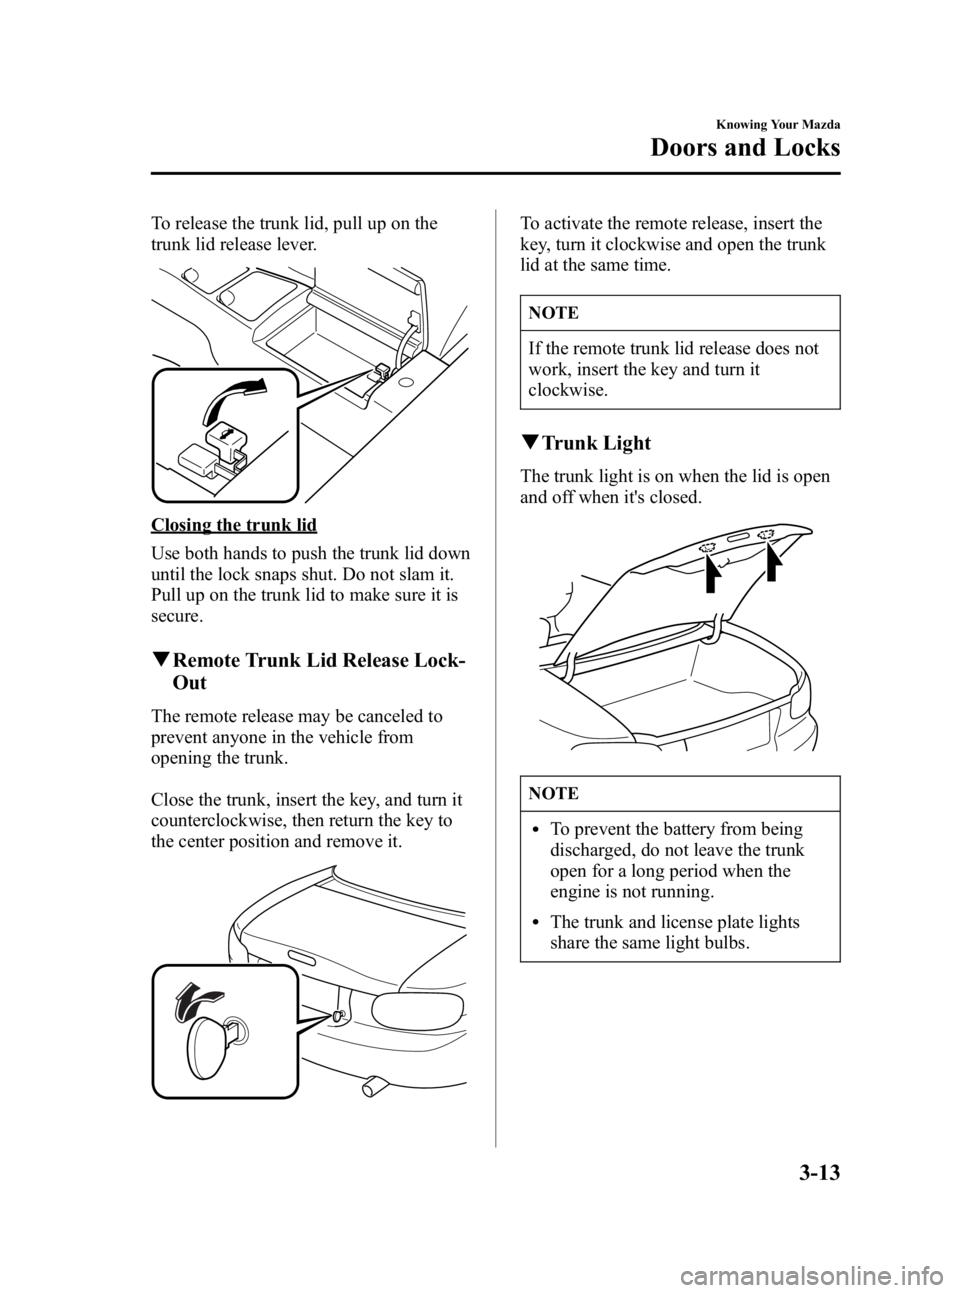 MAZDA MODEL SPEED MX-5 MIATA 2005 User Guide Black plate (55,1)
To release the trunk lid, pull up on the
trunk lid release lever.
Closing the trunk lid
Use both hands to push the trunk lid down
until the lock snaps shut. Do not slam it.
Pull up 